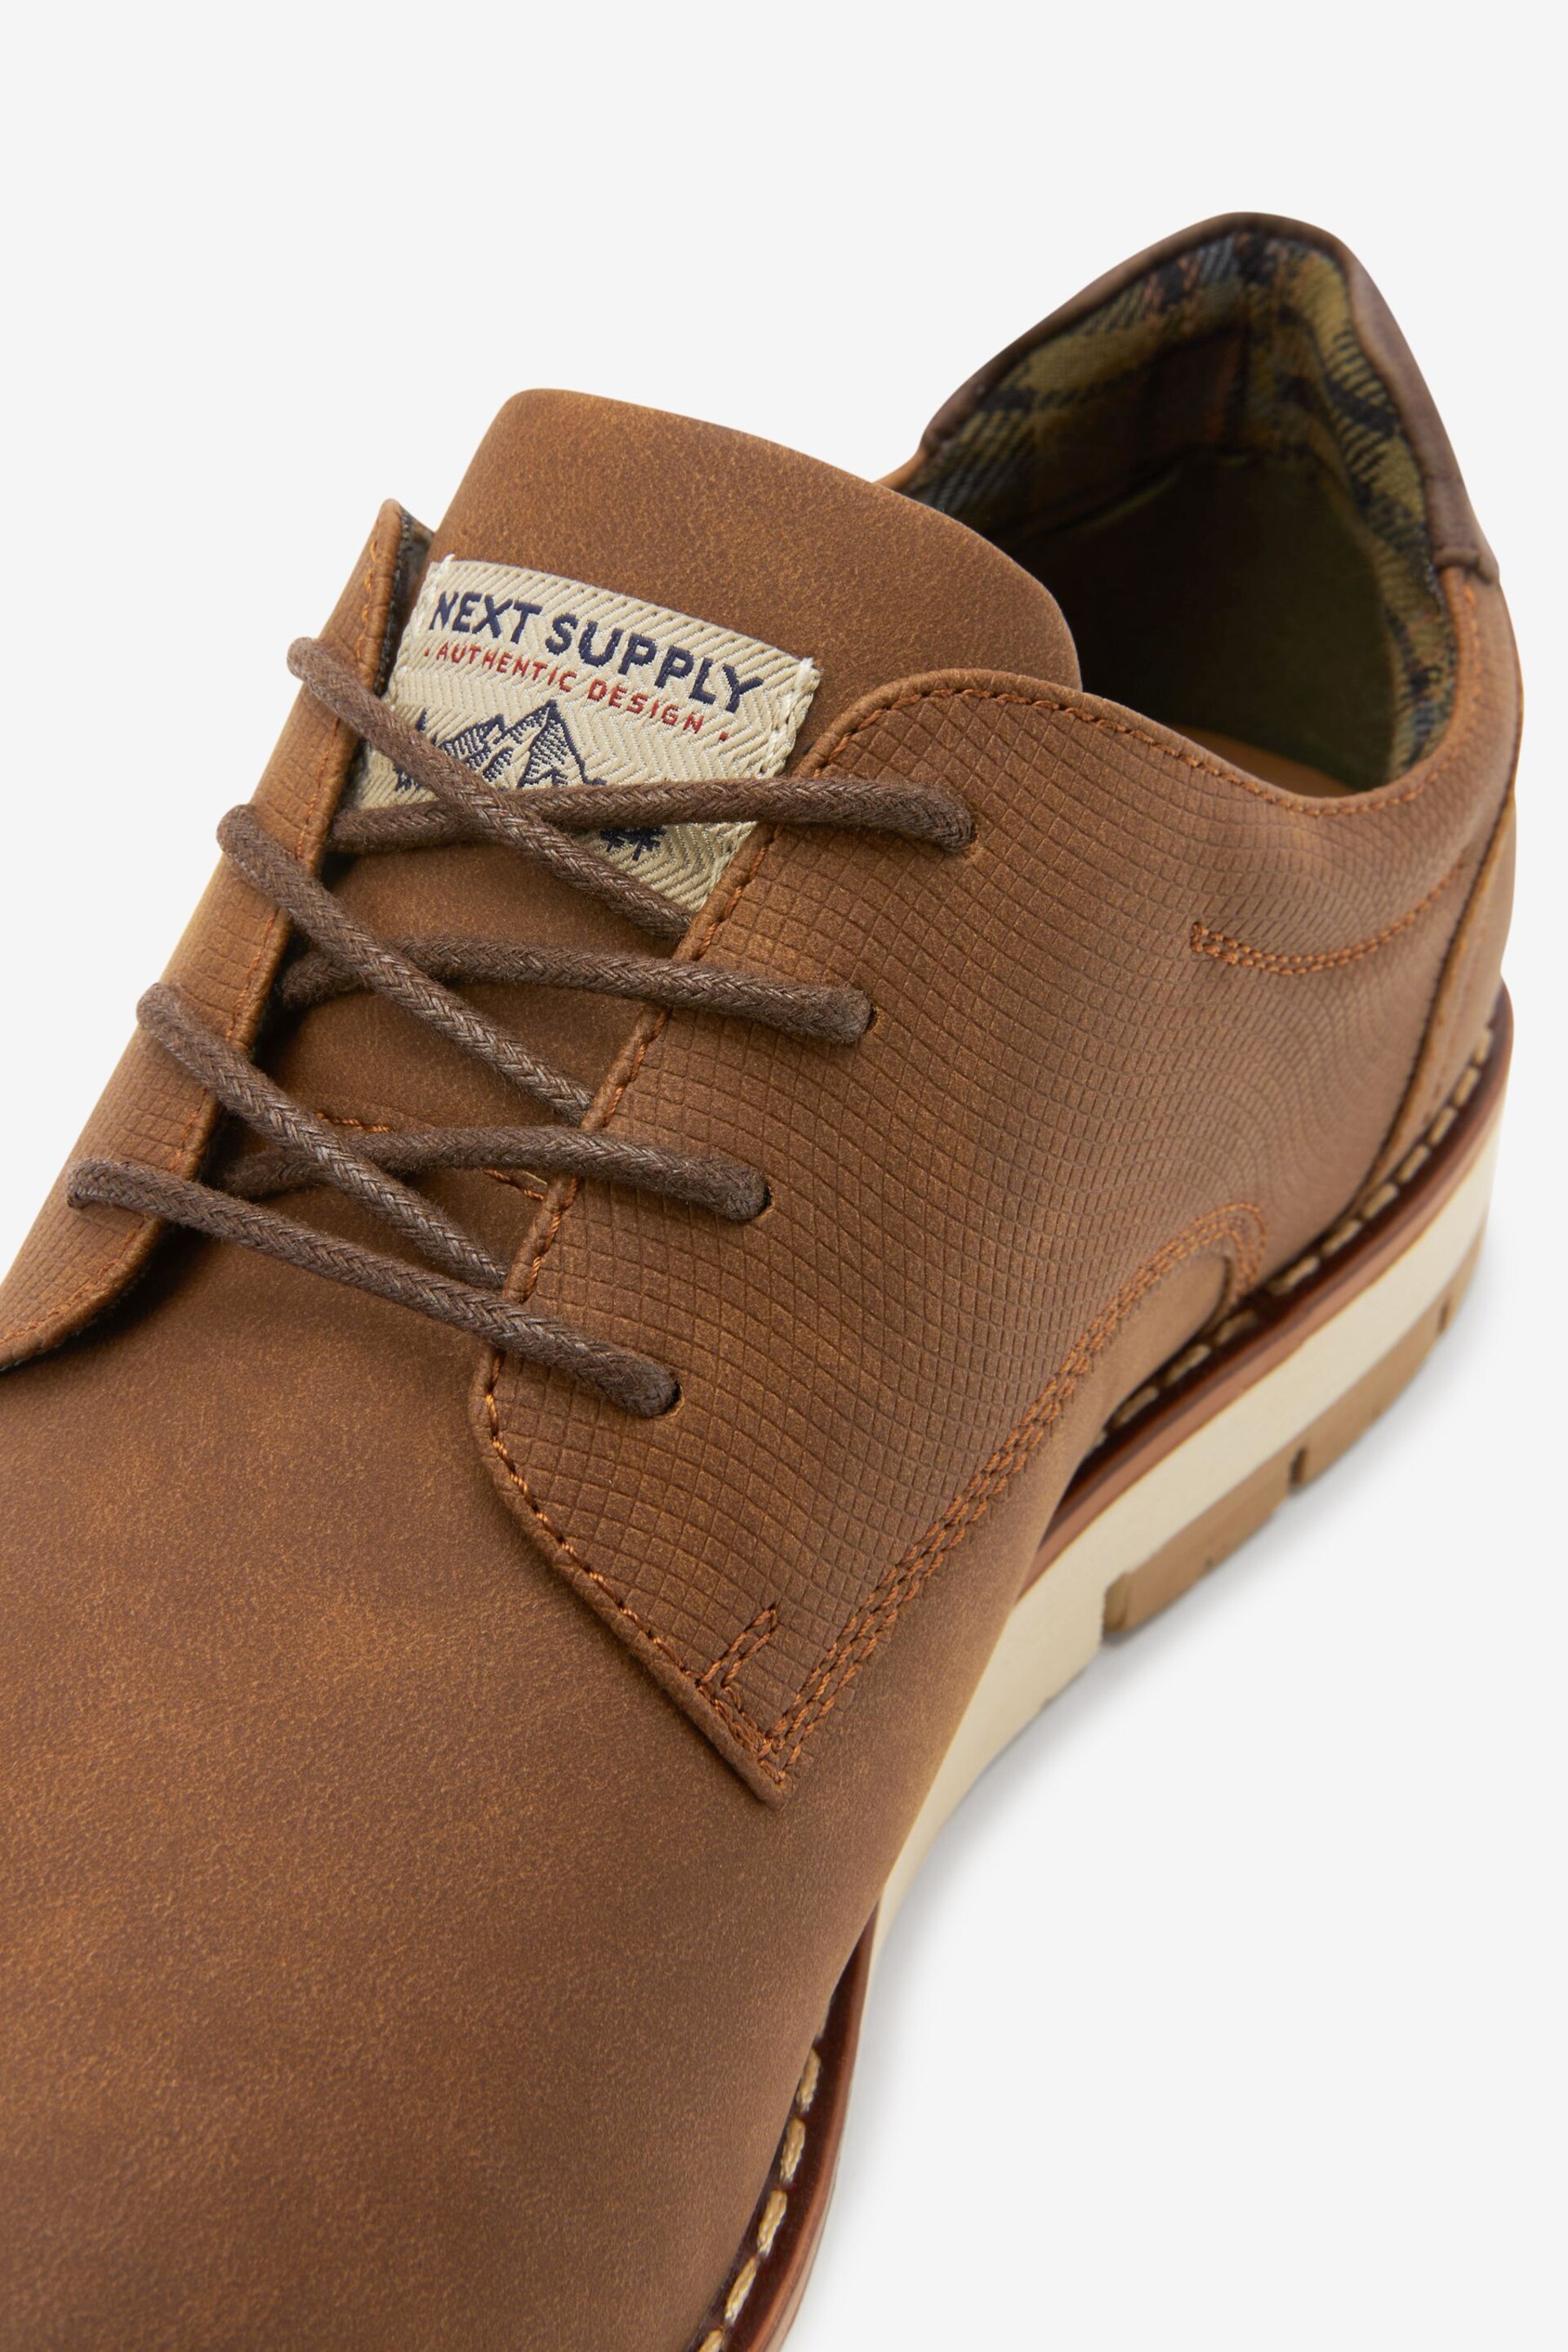 Tan Brown Sports Wedges Shoes - Image 4 of 4